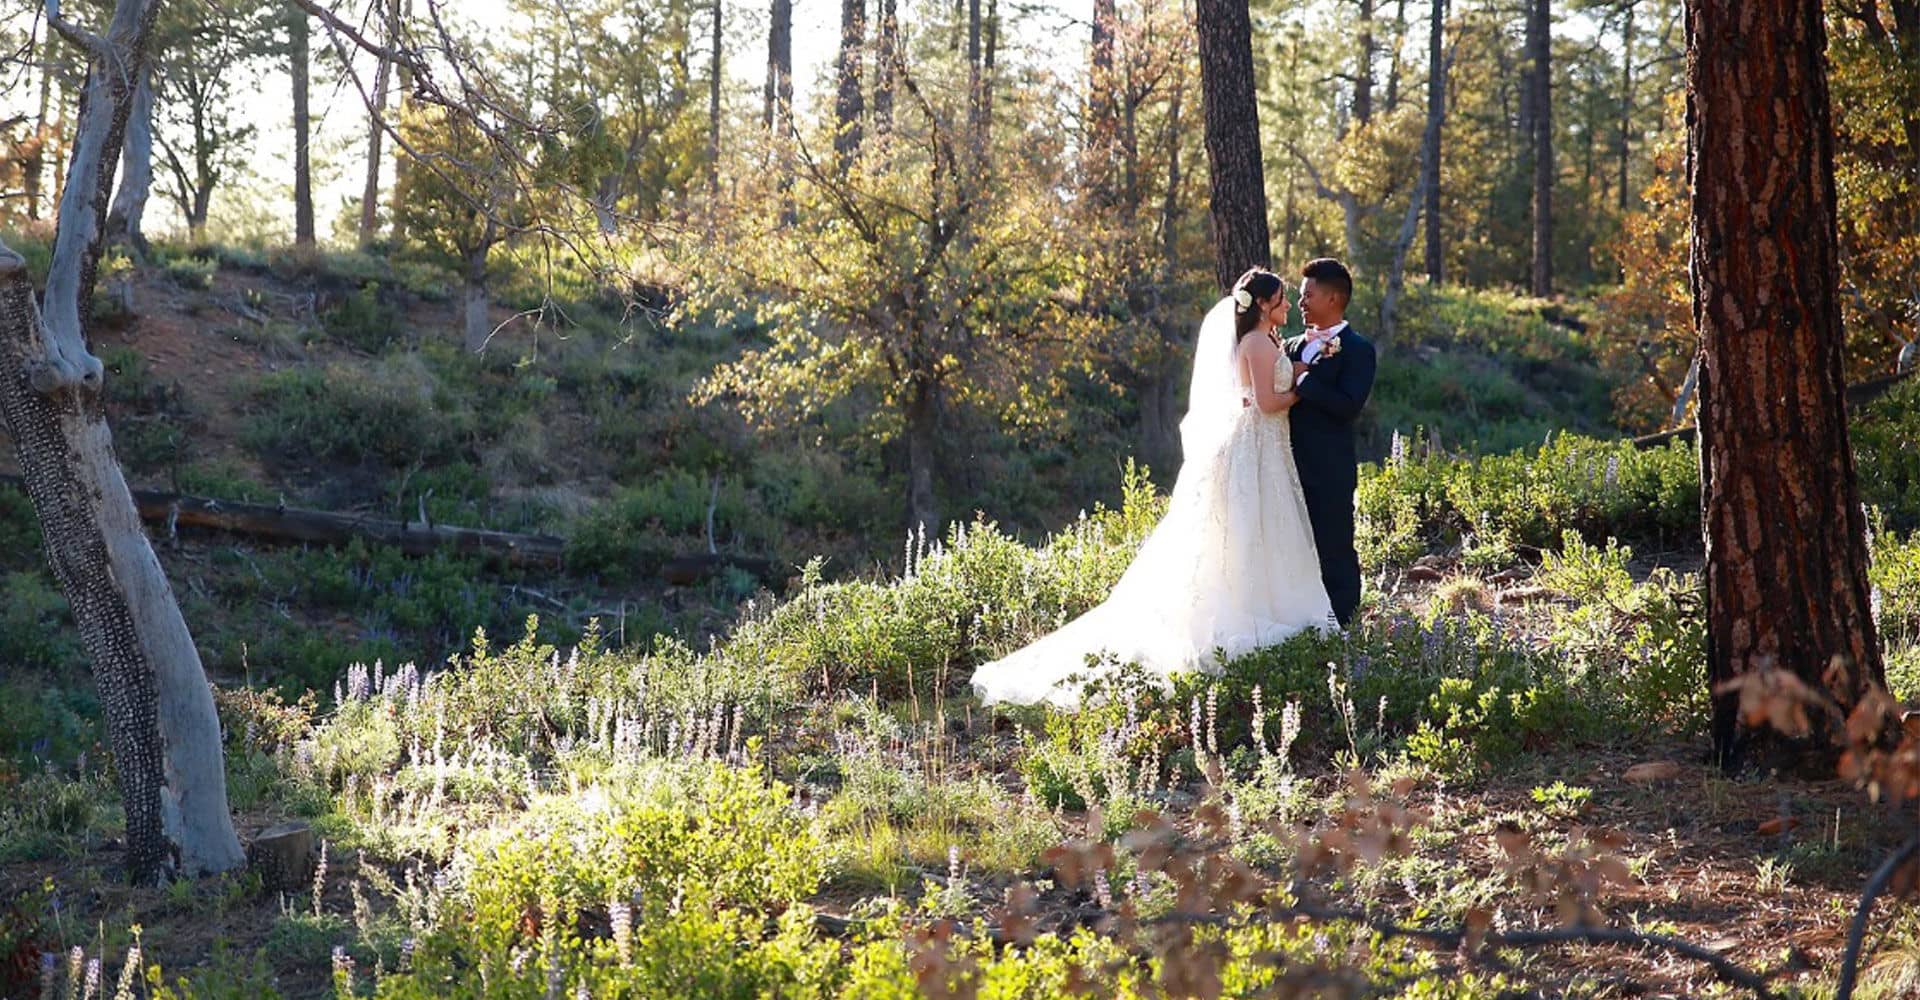 Outdoor weddings at Cabins on Strawberry Hill wedding venue in Northern AZ